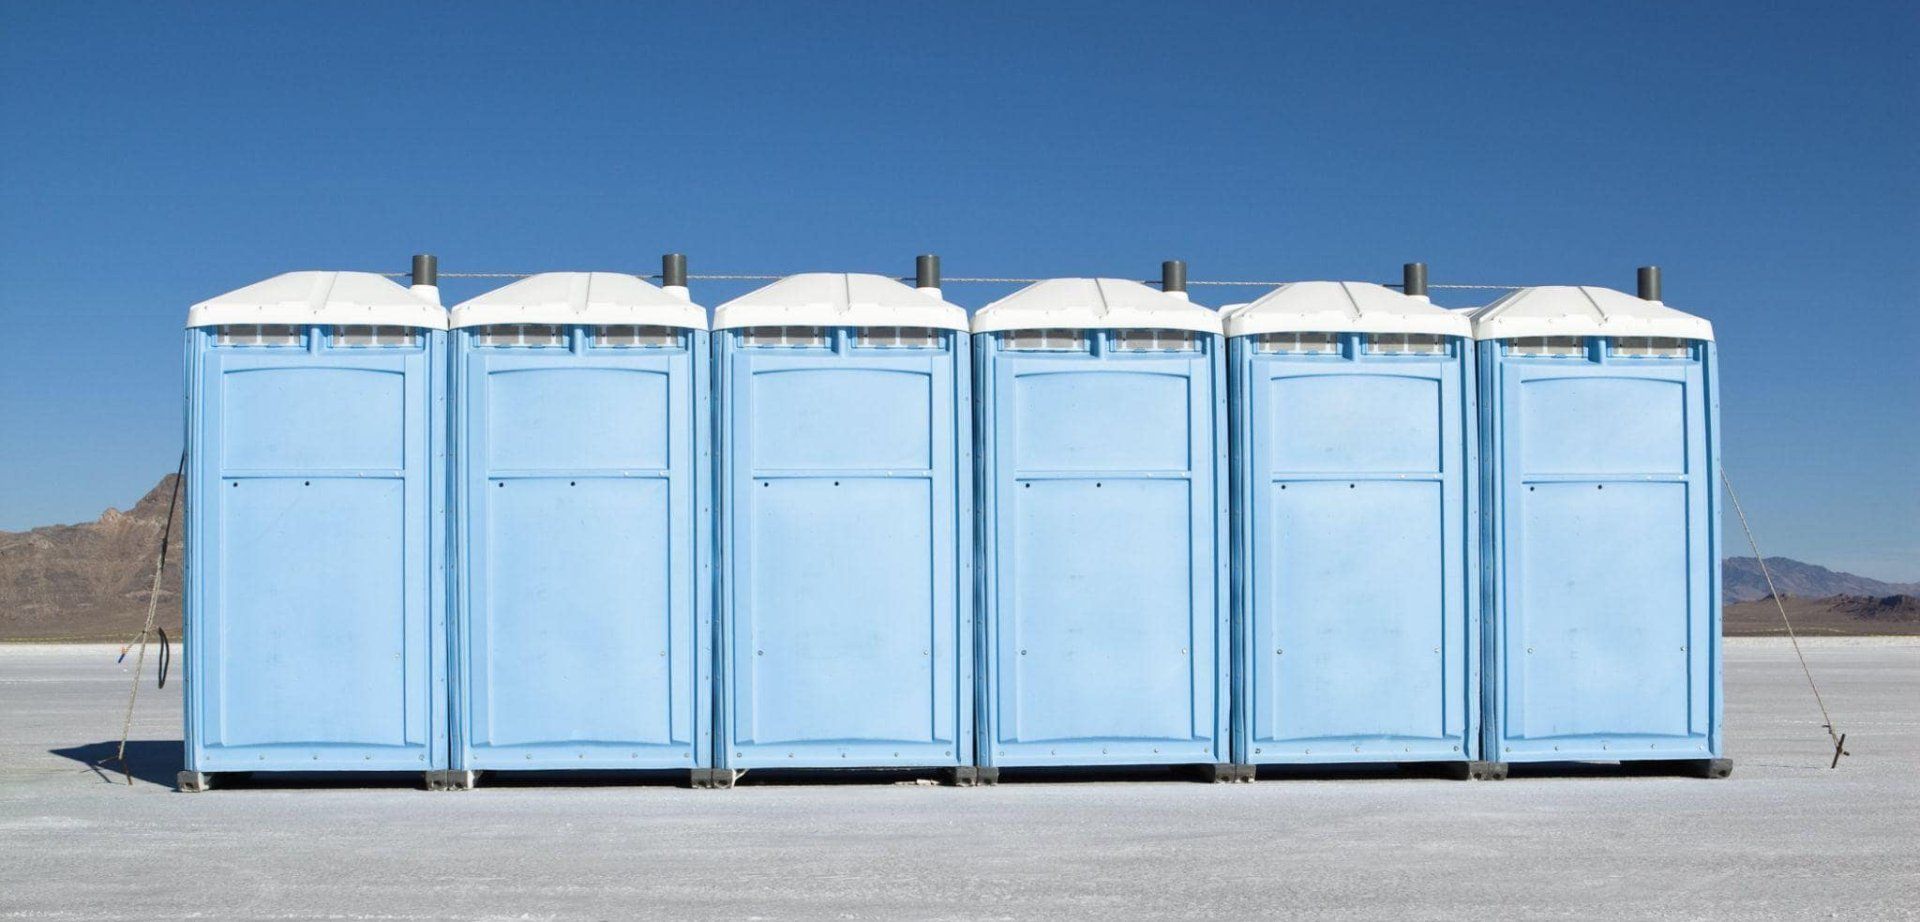 Top Benefits of Renting a Porta Potty at Construction Sites